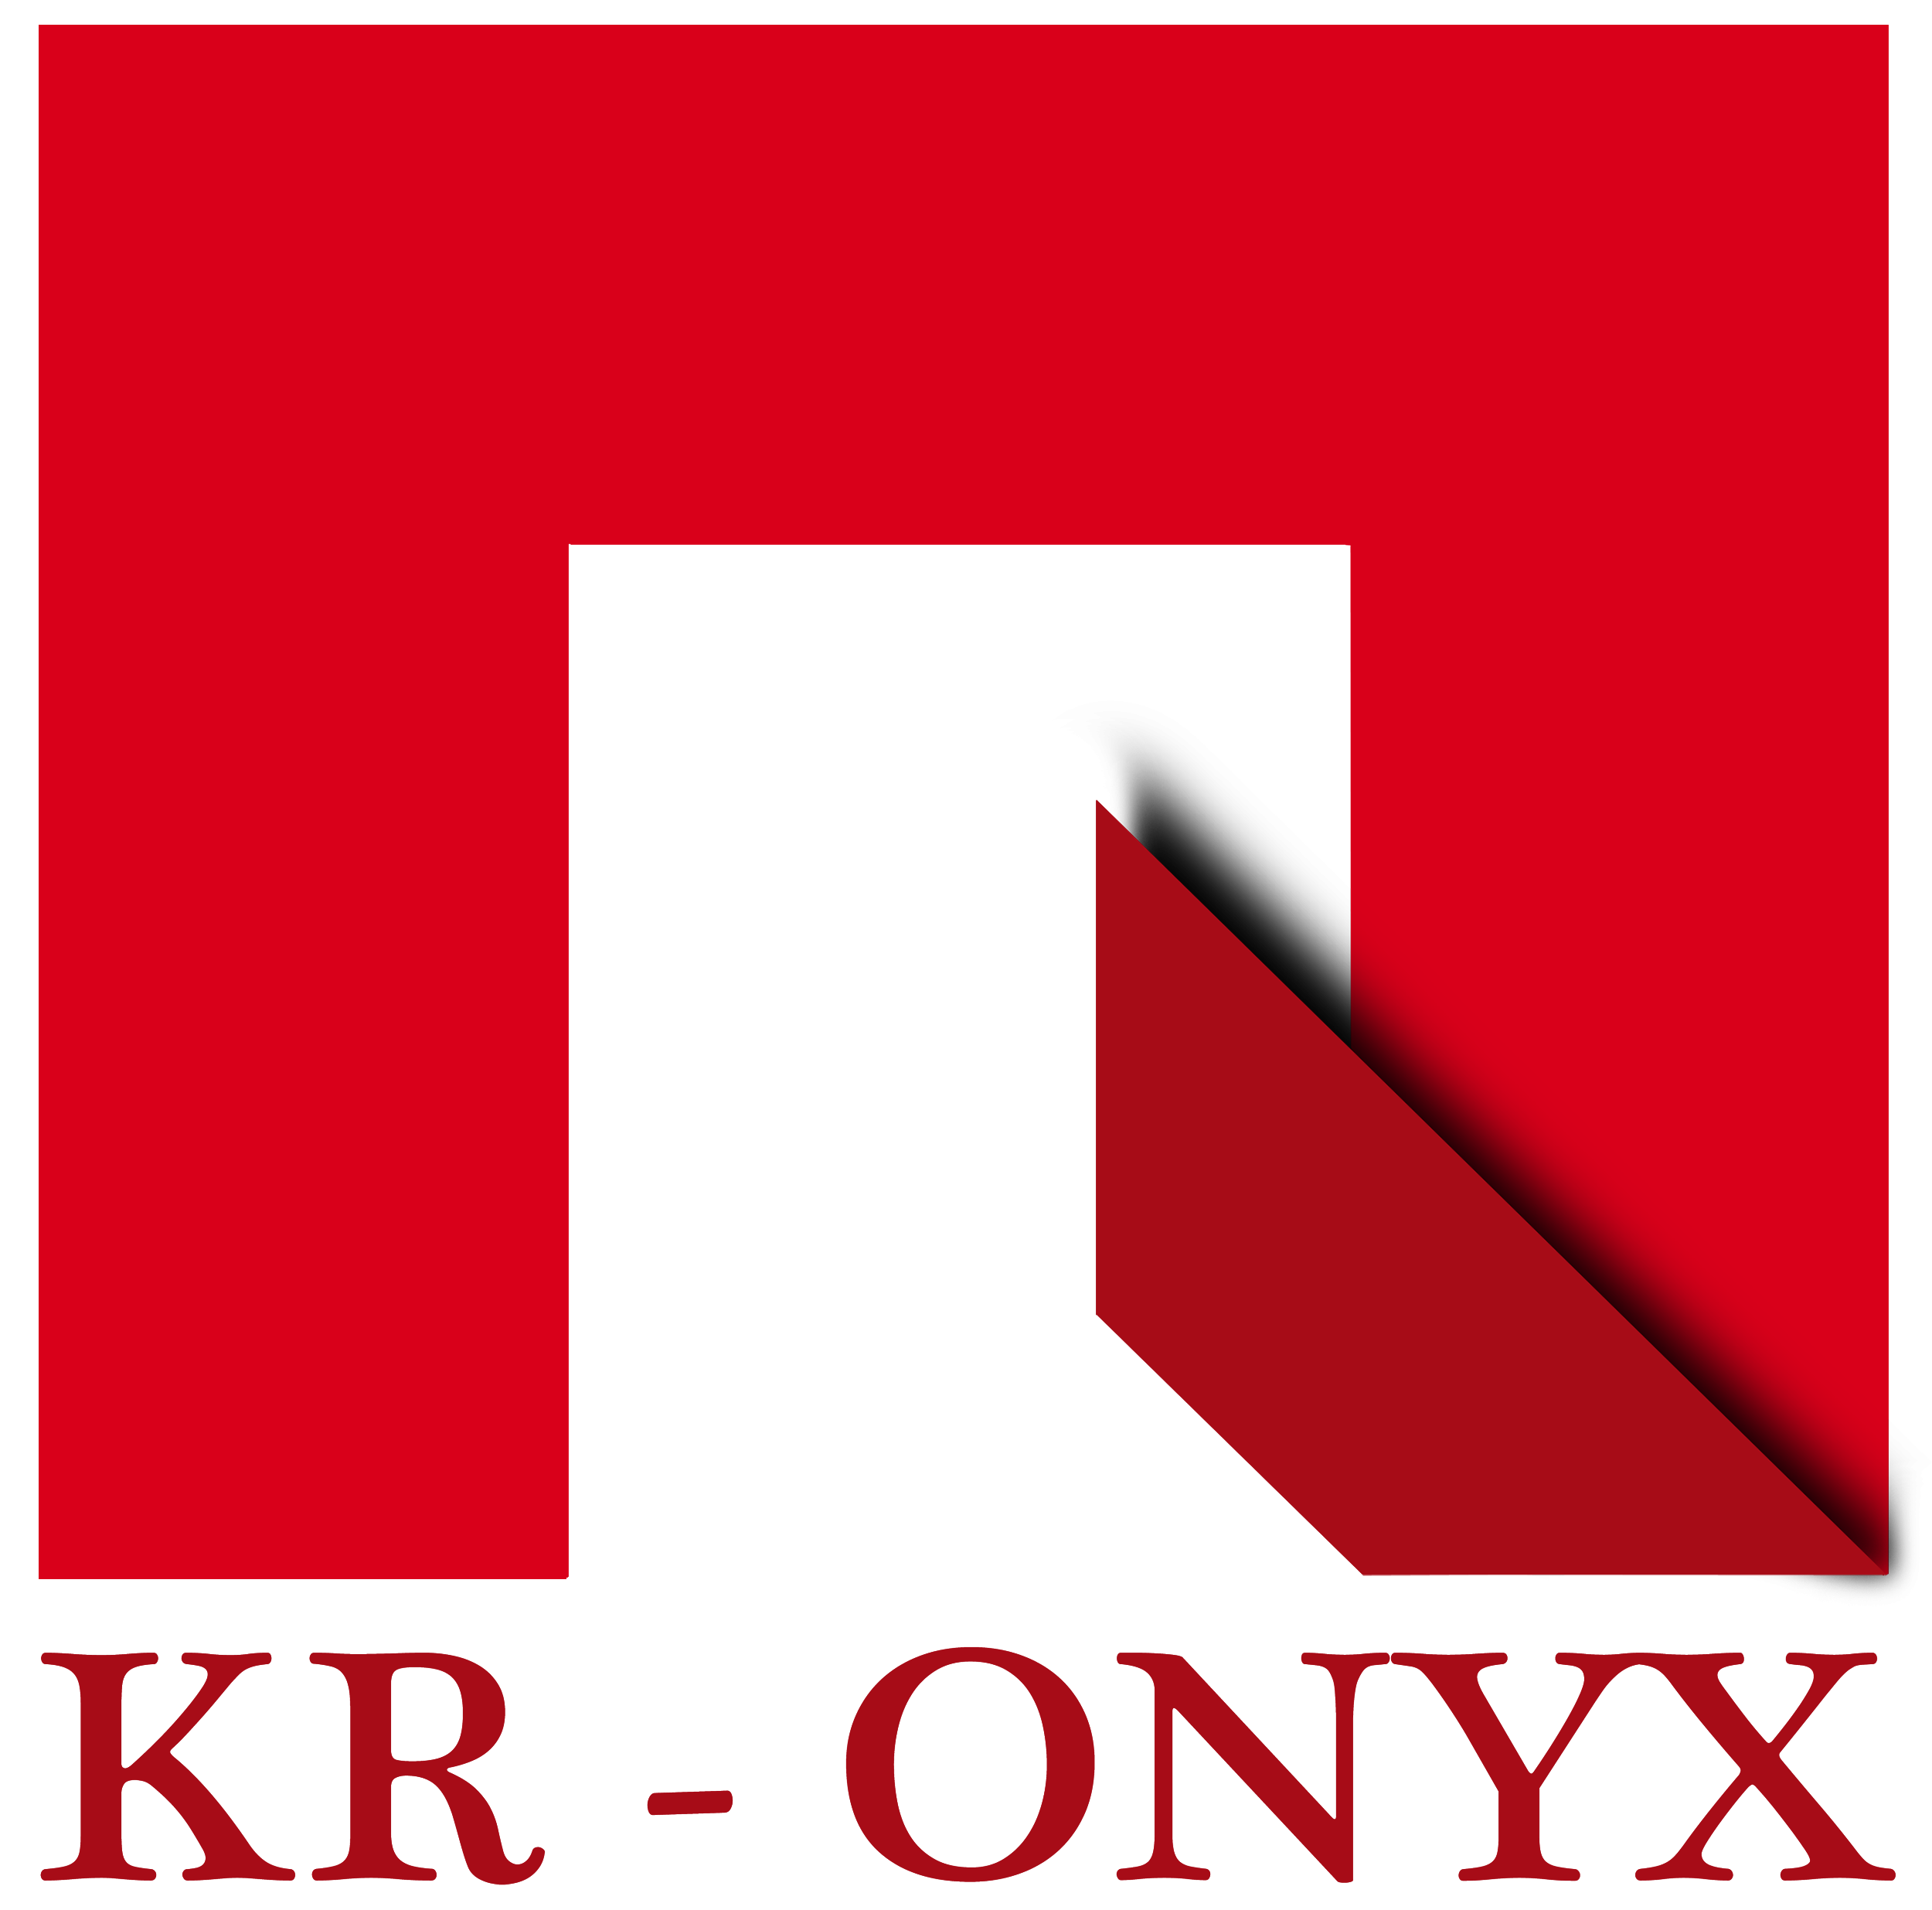 KR-ONYX for Marble, Alabaster, Granite tiles and Stones